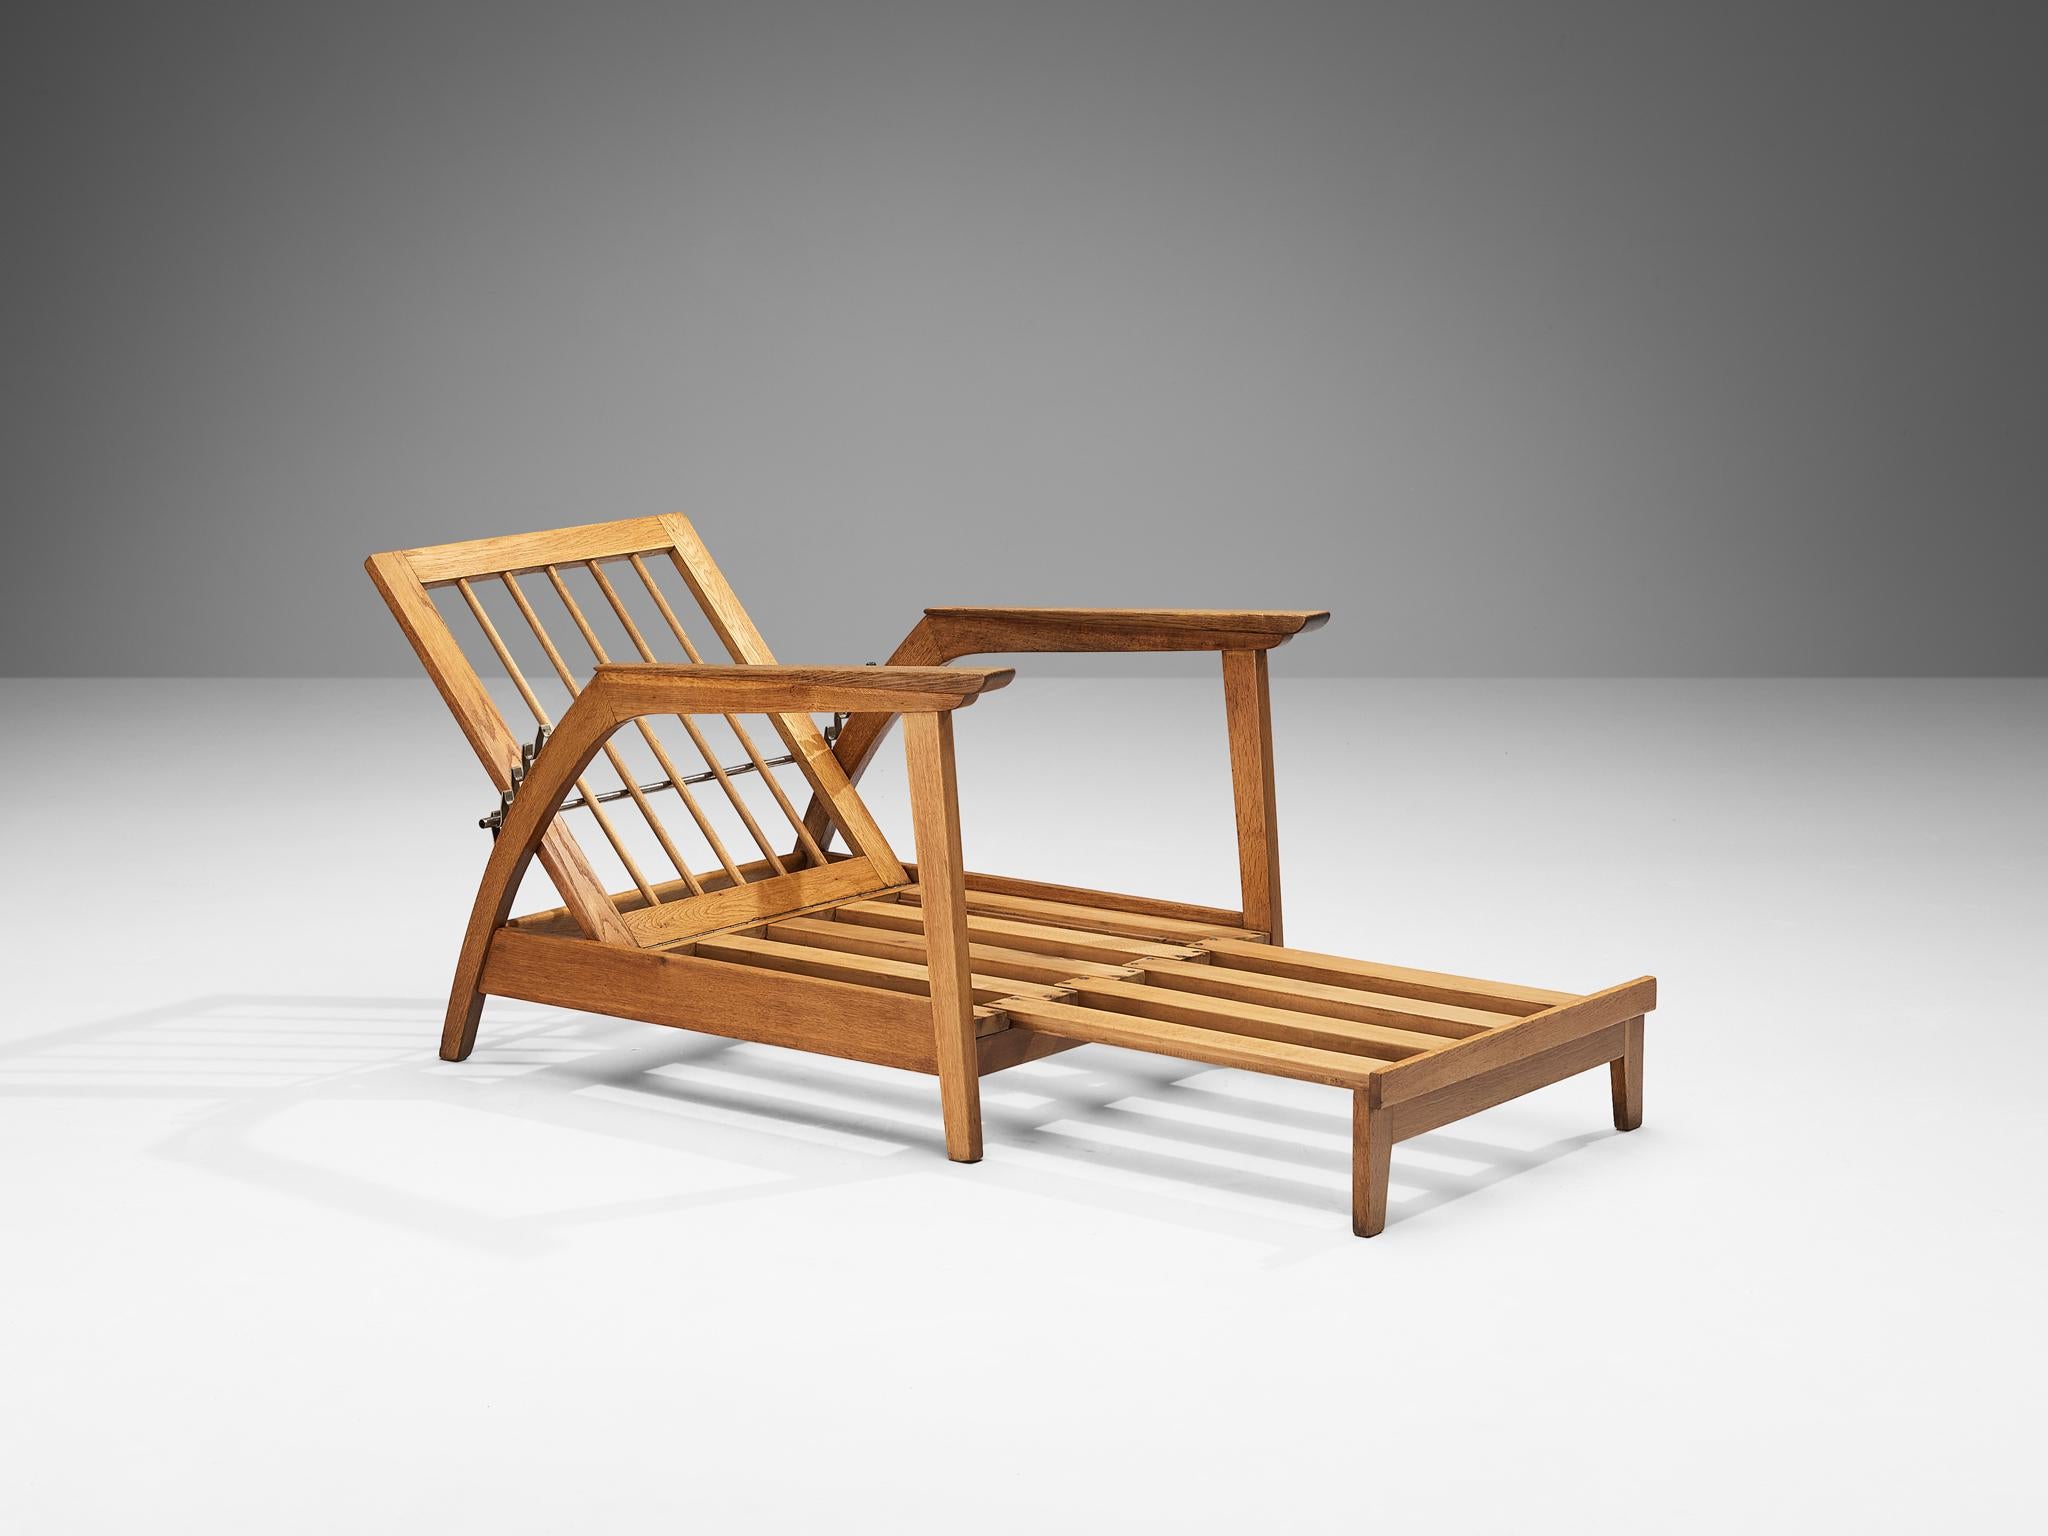 Chaise longue, oak, metal, Scandinavia, 1950s

This chaise longue is a perfect example of Scandinavian Modernism by means of its simplicity and multi-functionality. The seat of the chair can be slid outwards, turning it into a daybed. Slid